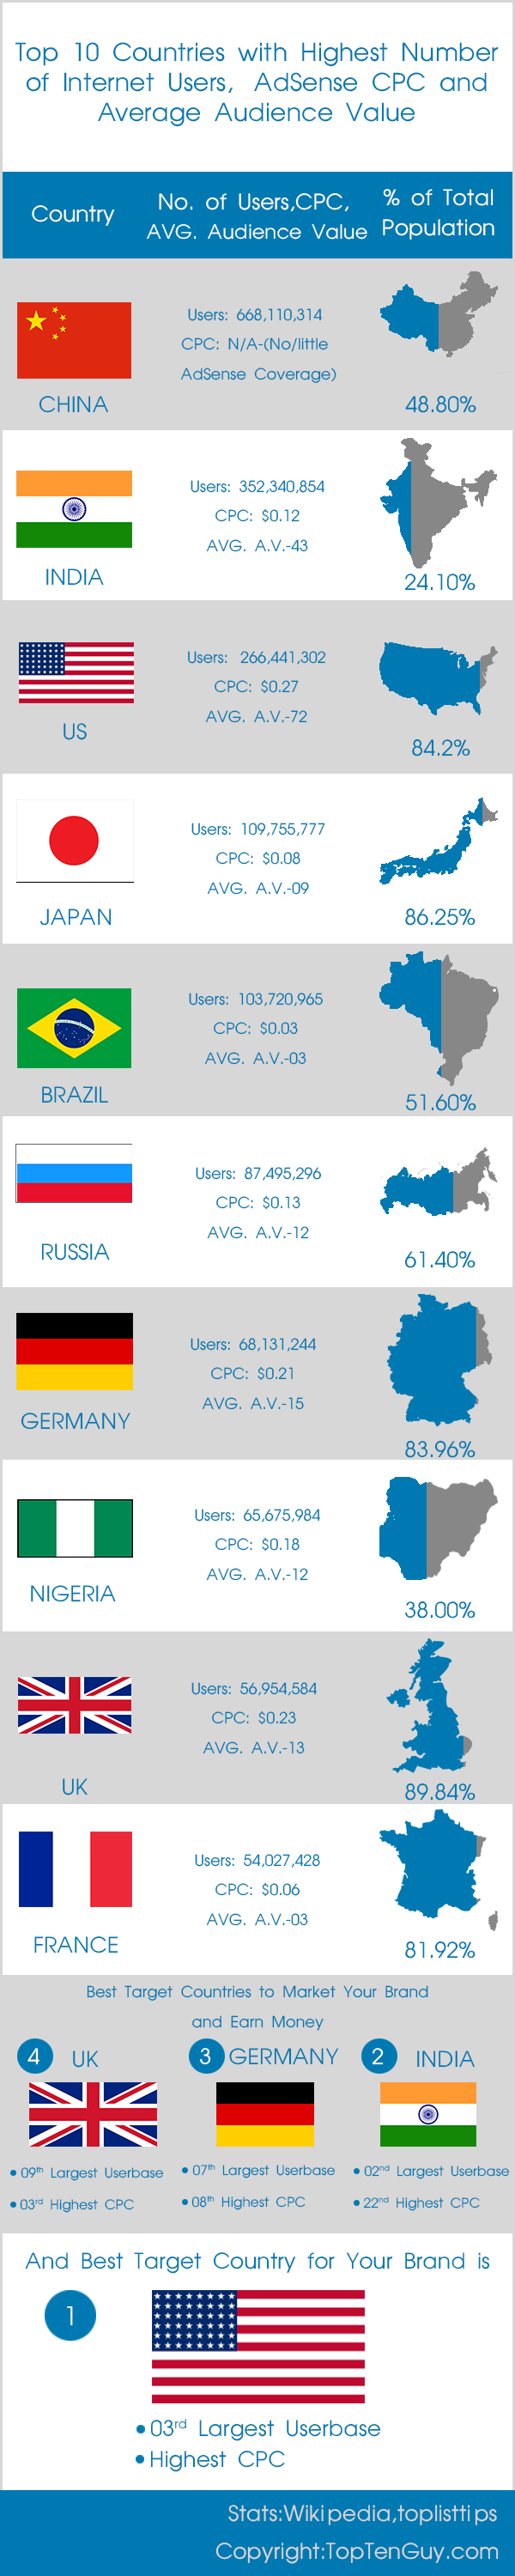 with Highest Number of Internet Users, Best AdSense CPC and Average Audience Value | Visual.ly